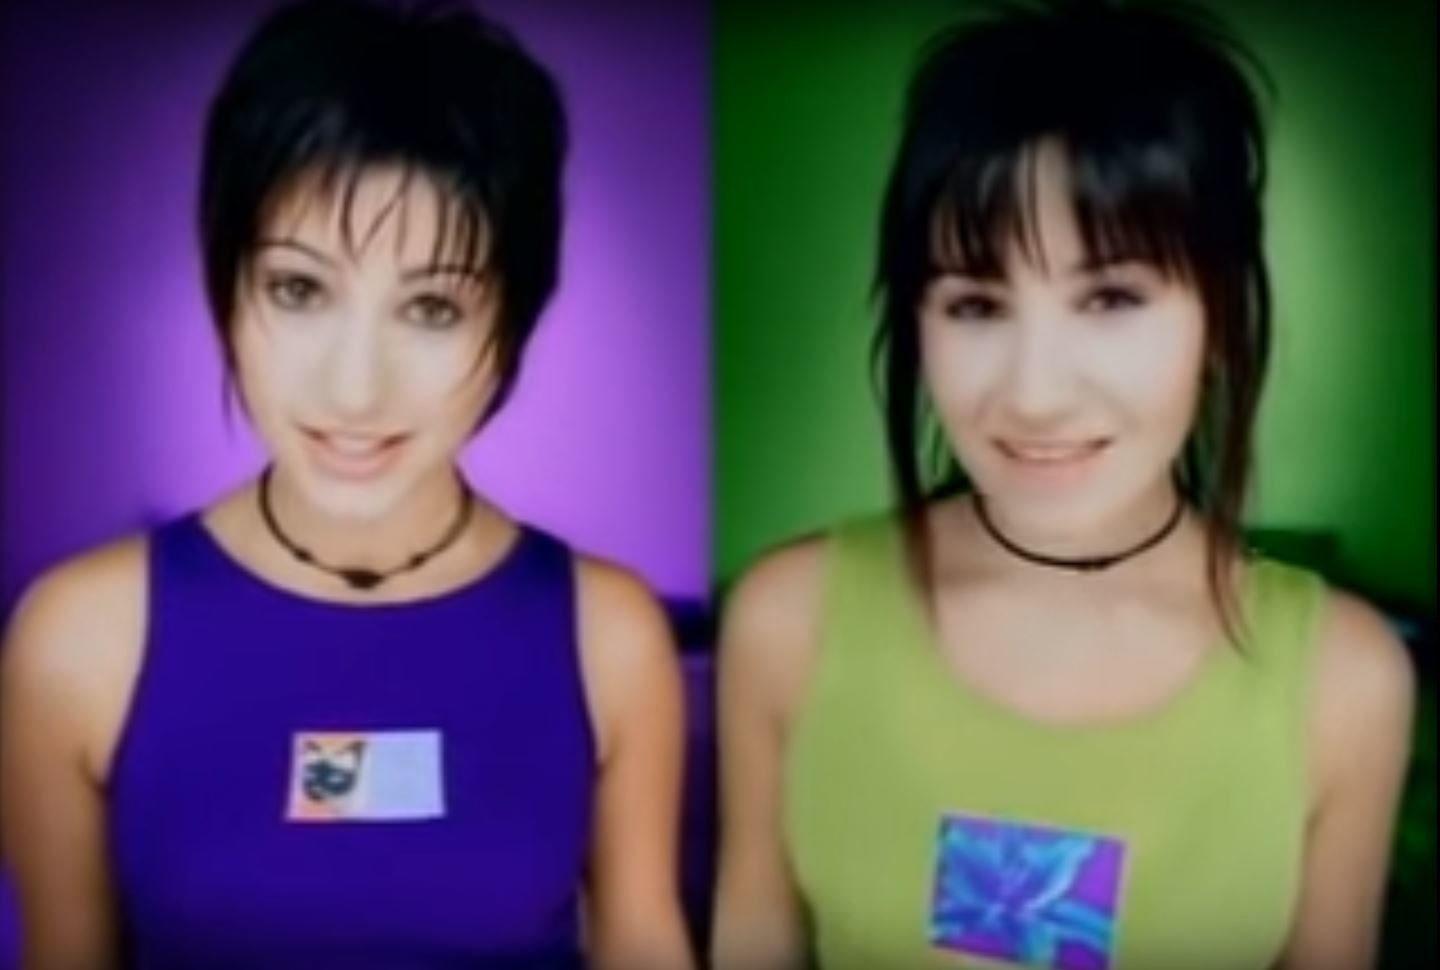 Christine, left, in a purple top on a purple background, and Sharon, right, in a green top on a green background